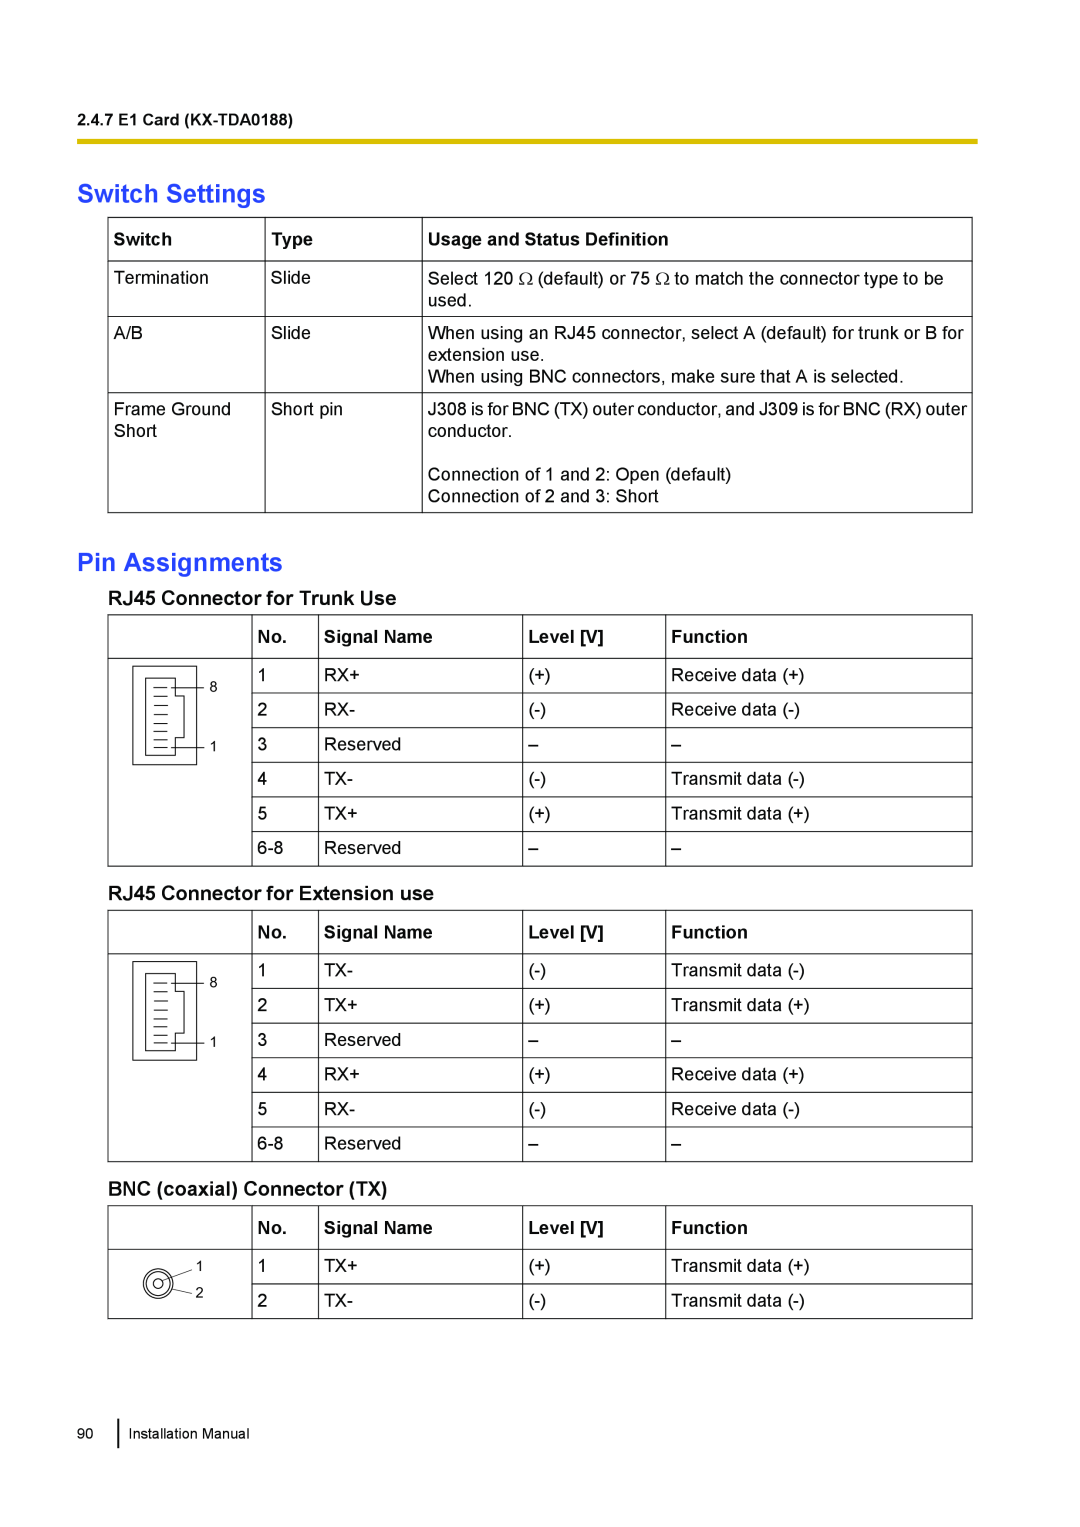 Panasonic KX-TDA100 Switch Settings, Pin Assignments, RJ45 Connector for Trunk Use, RJ45 Connector for Extension use, Type 